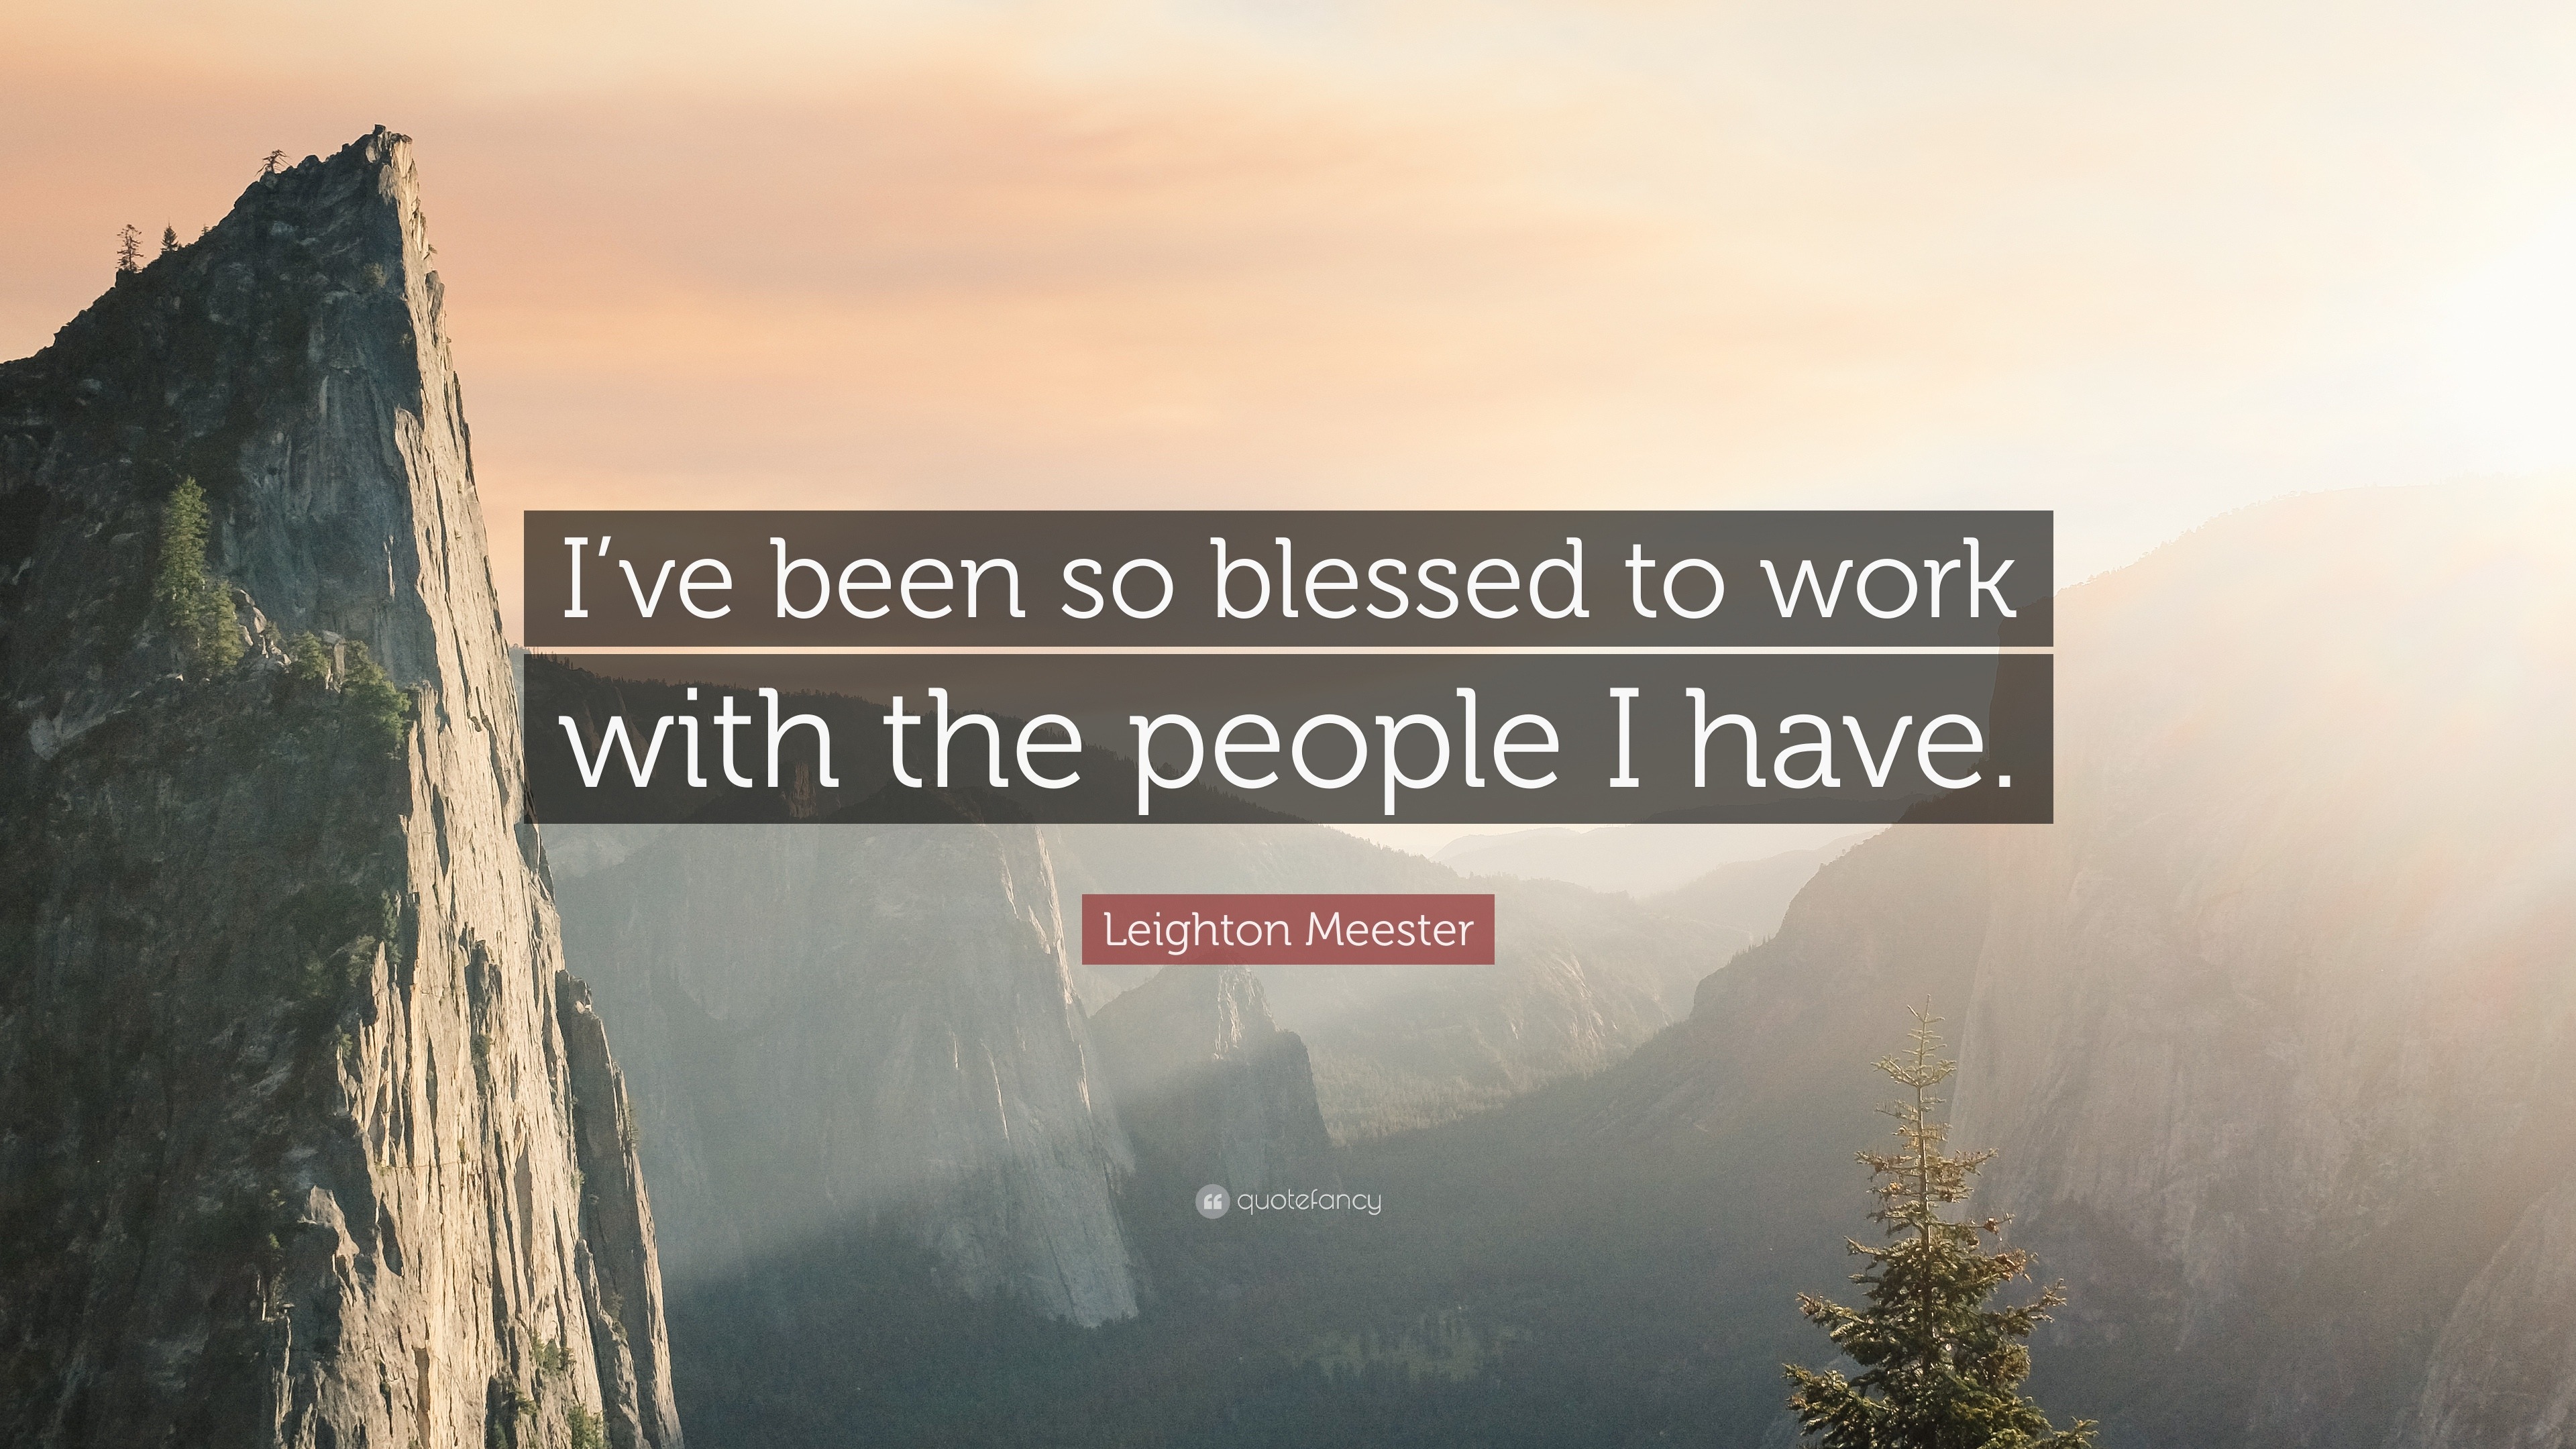 Leighton Meester Quote Ive Been So Blessed To Work With The People I Have